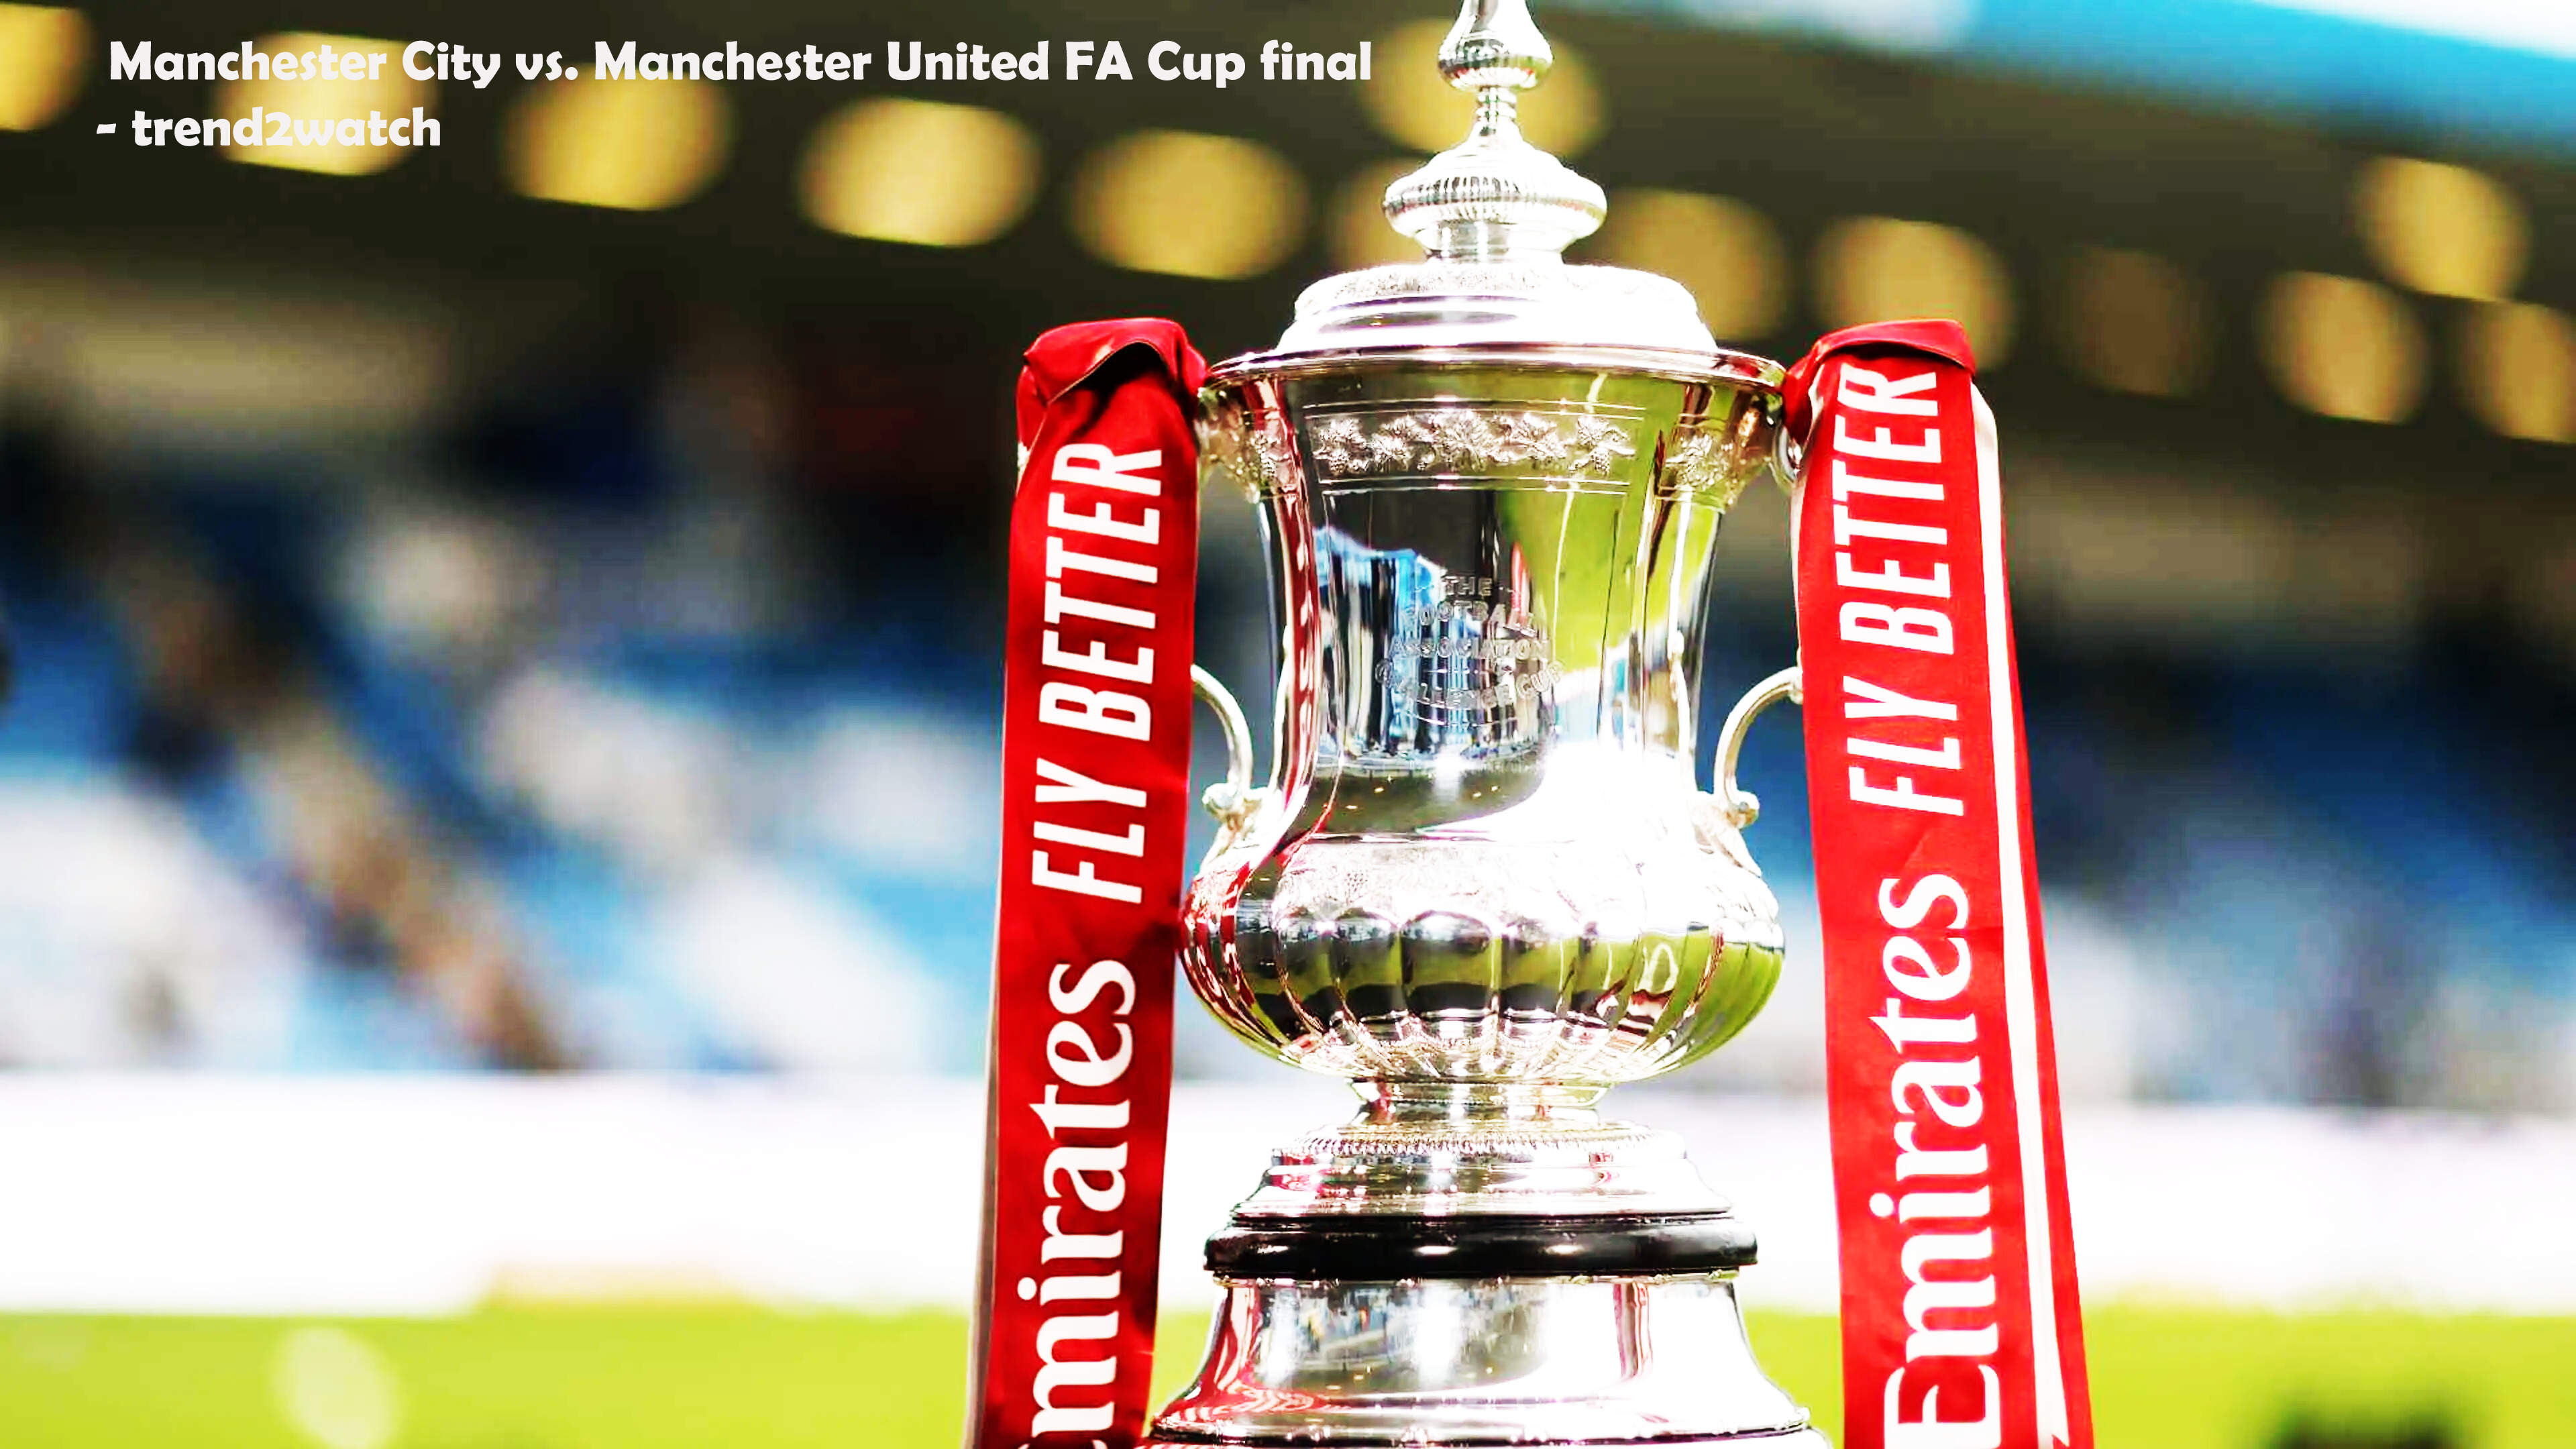 Manchester City vs. Manchester United: Thrilling FA Cup Final Showdown